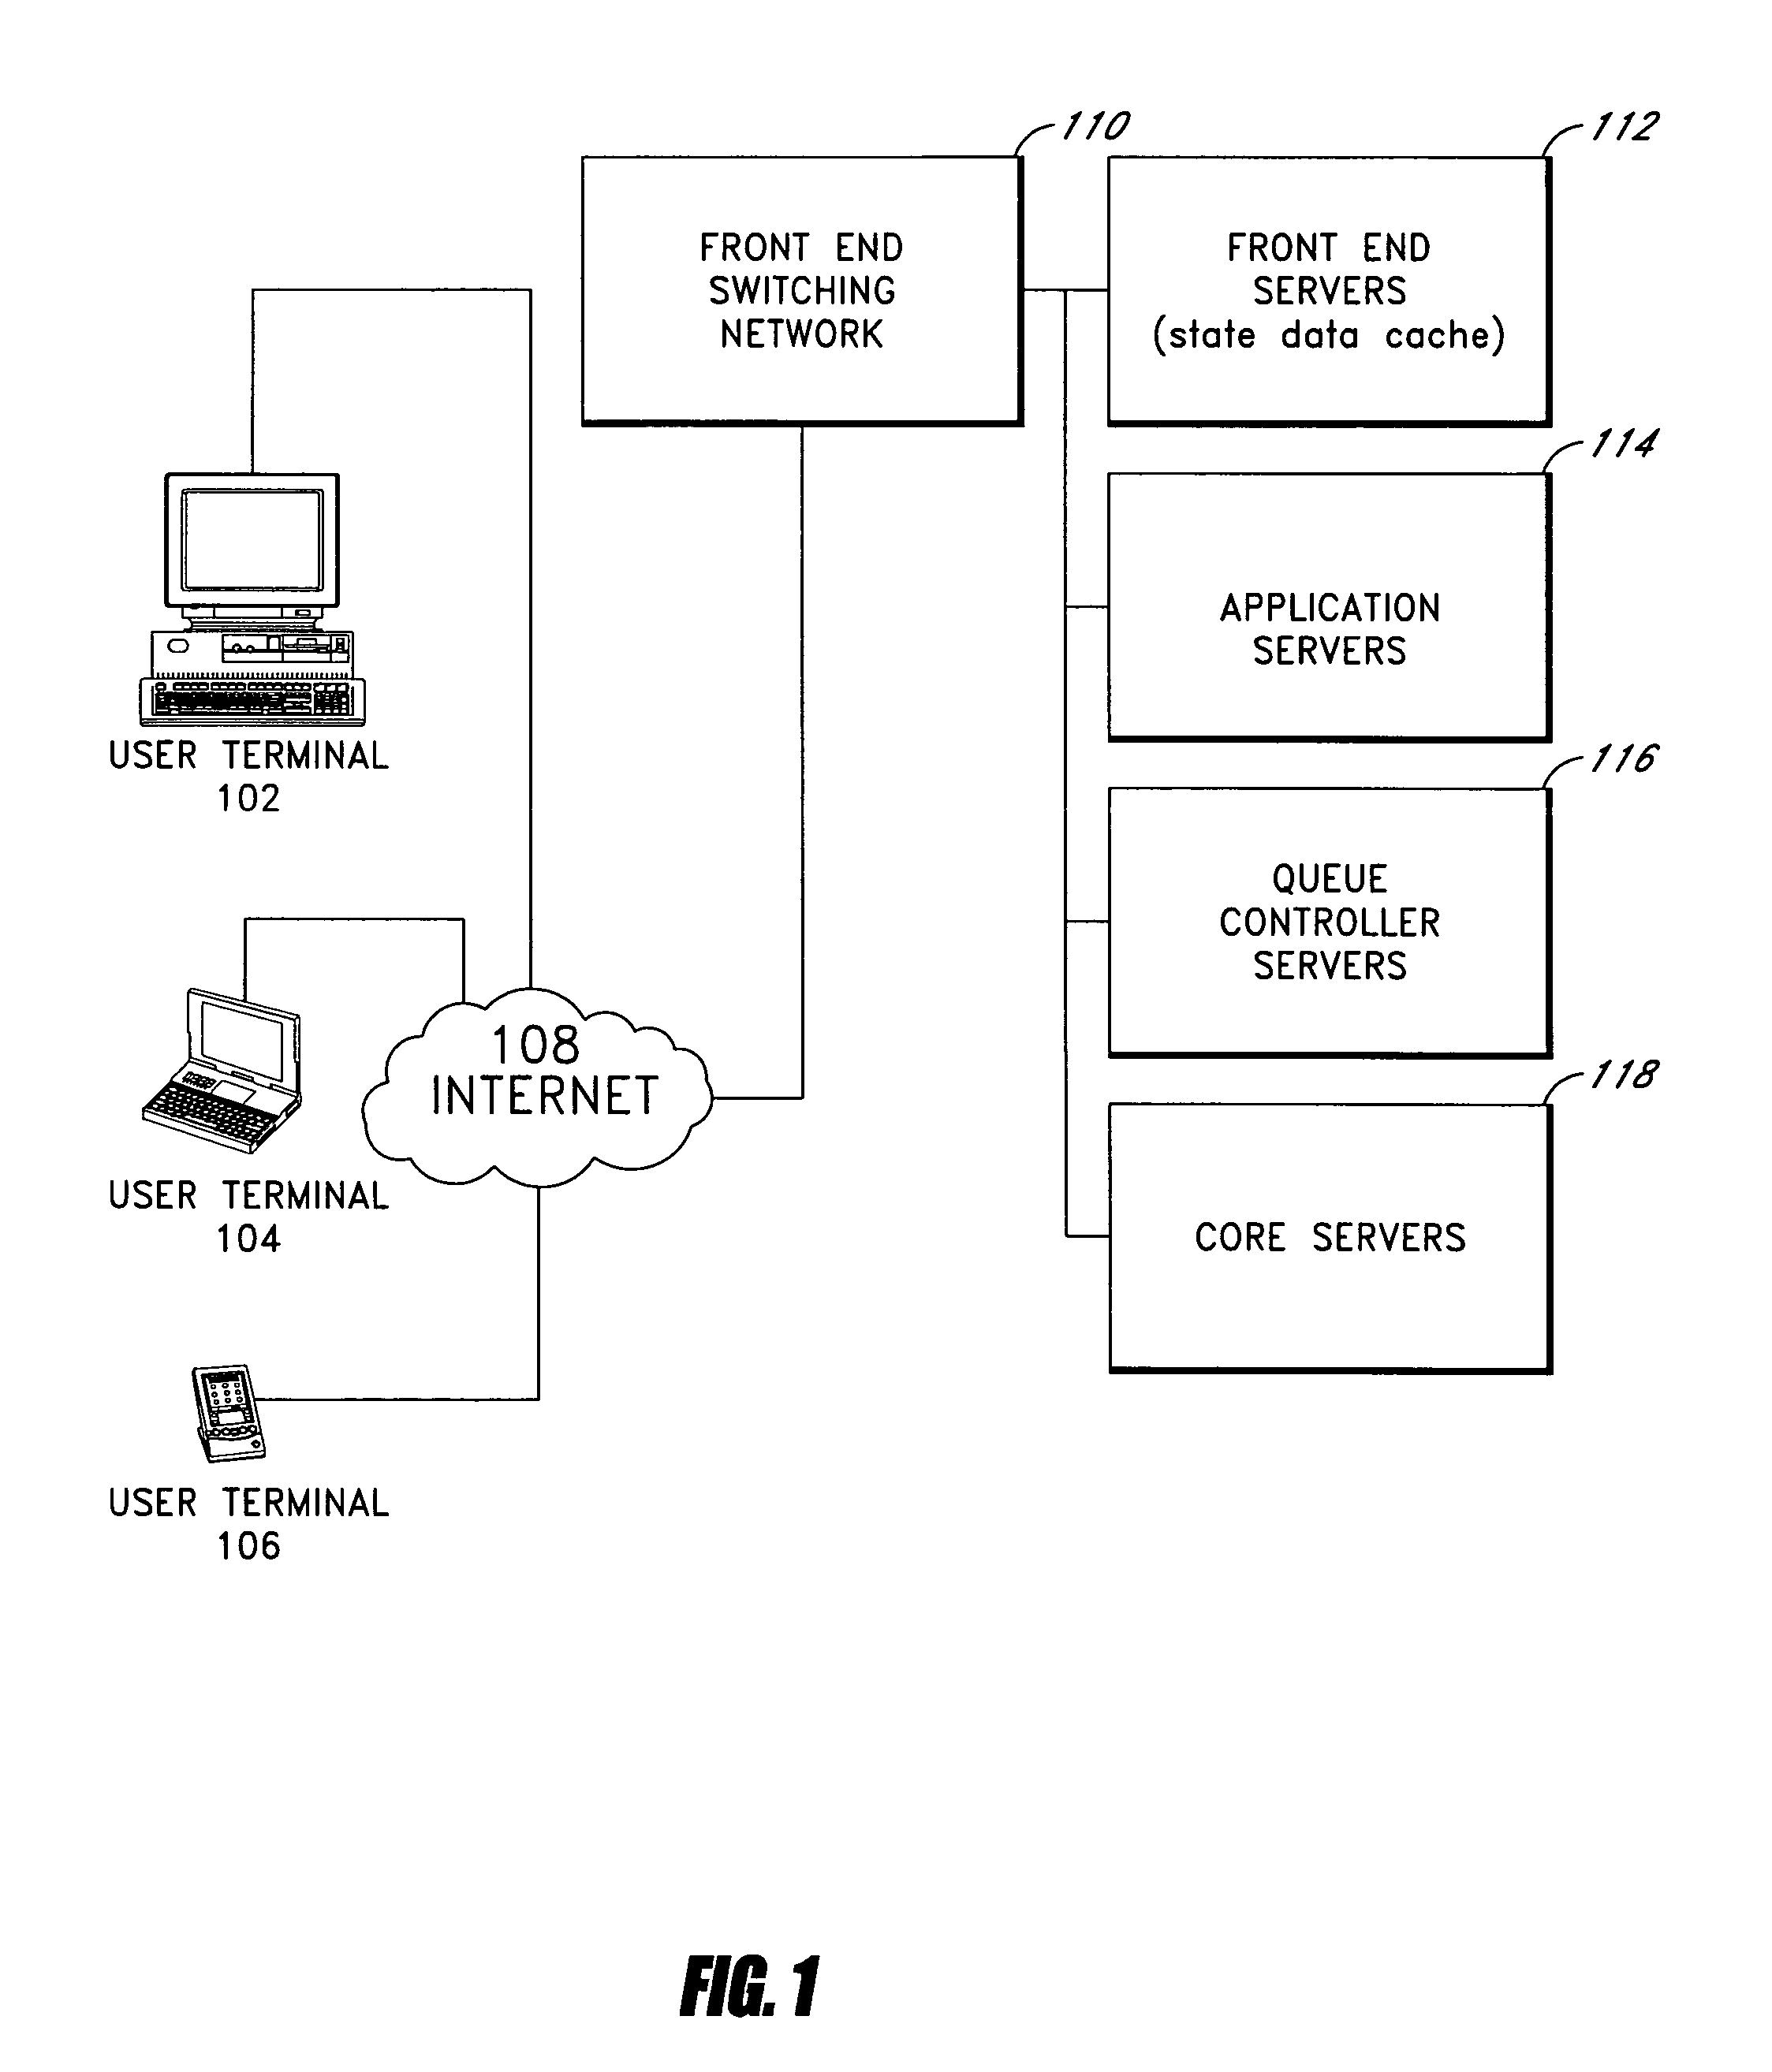 Systems and methods for queuing access to network resources